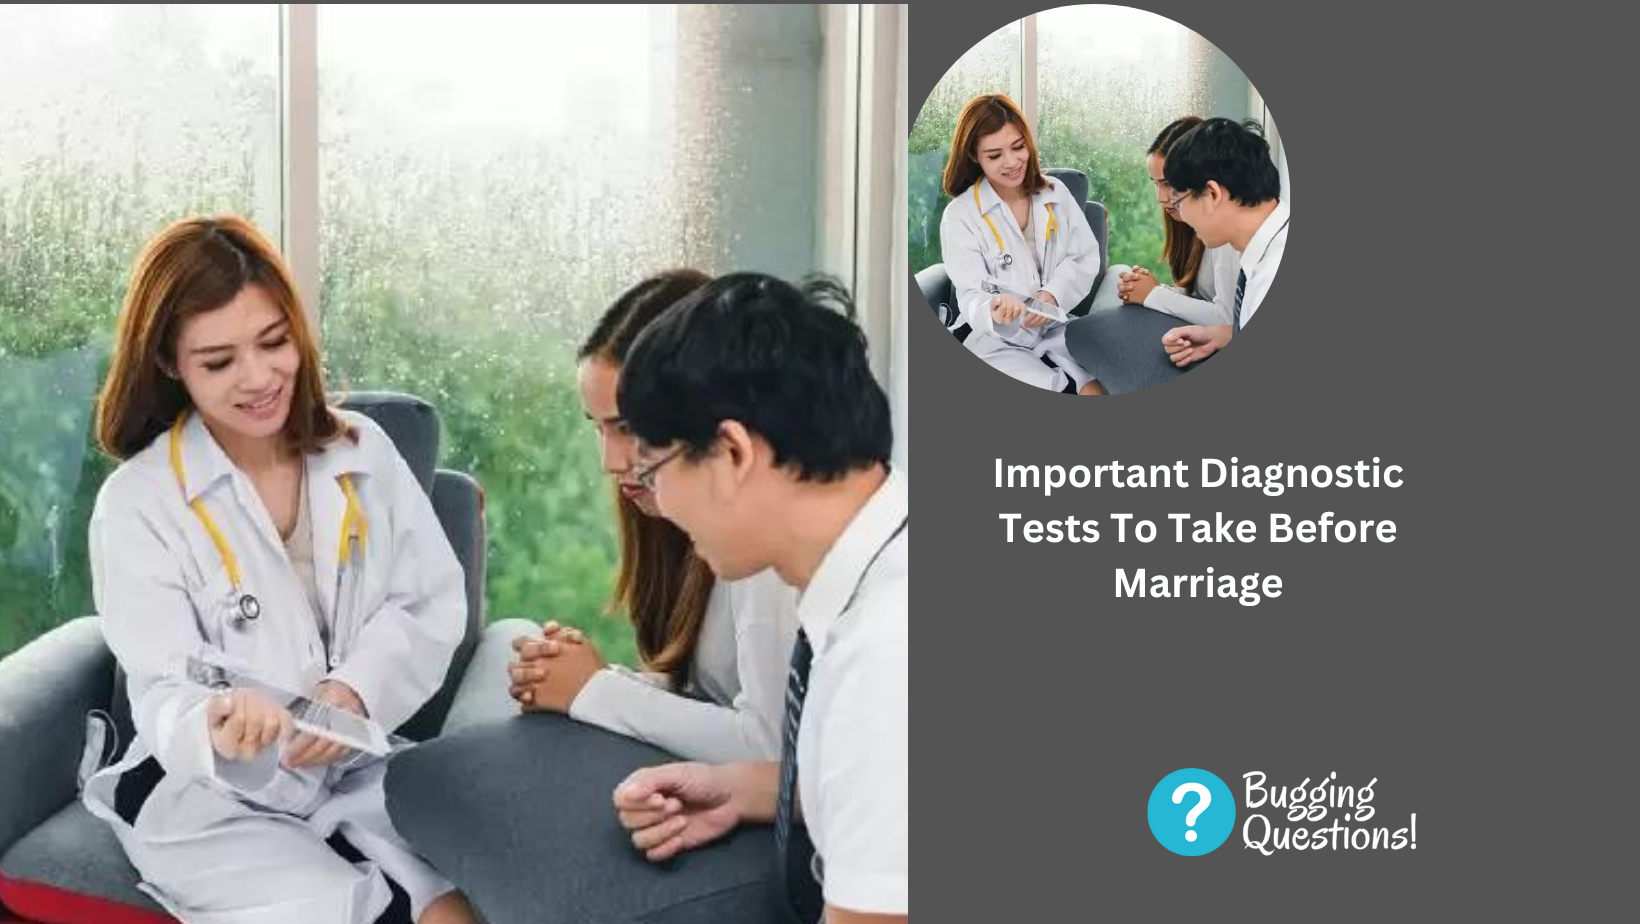 Important Diagnostic Tests To Take Before Marriage